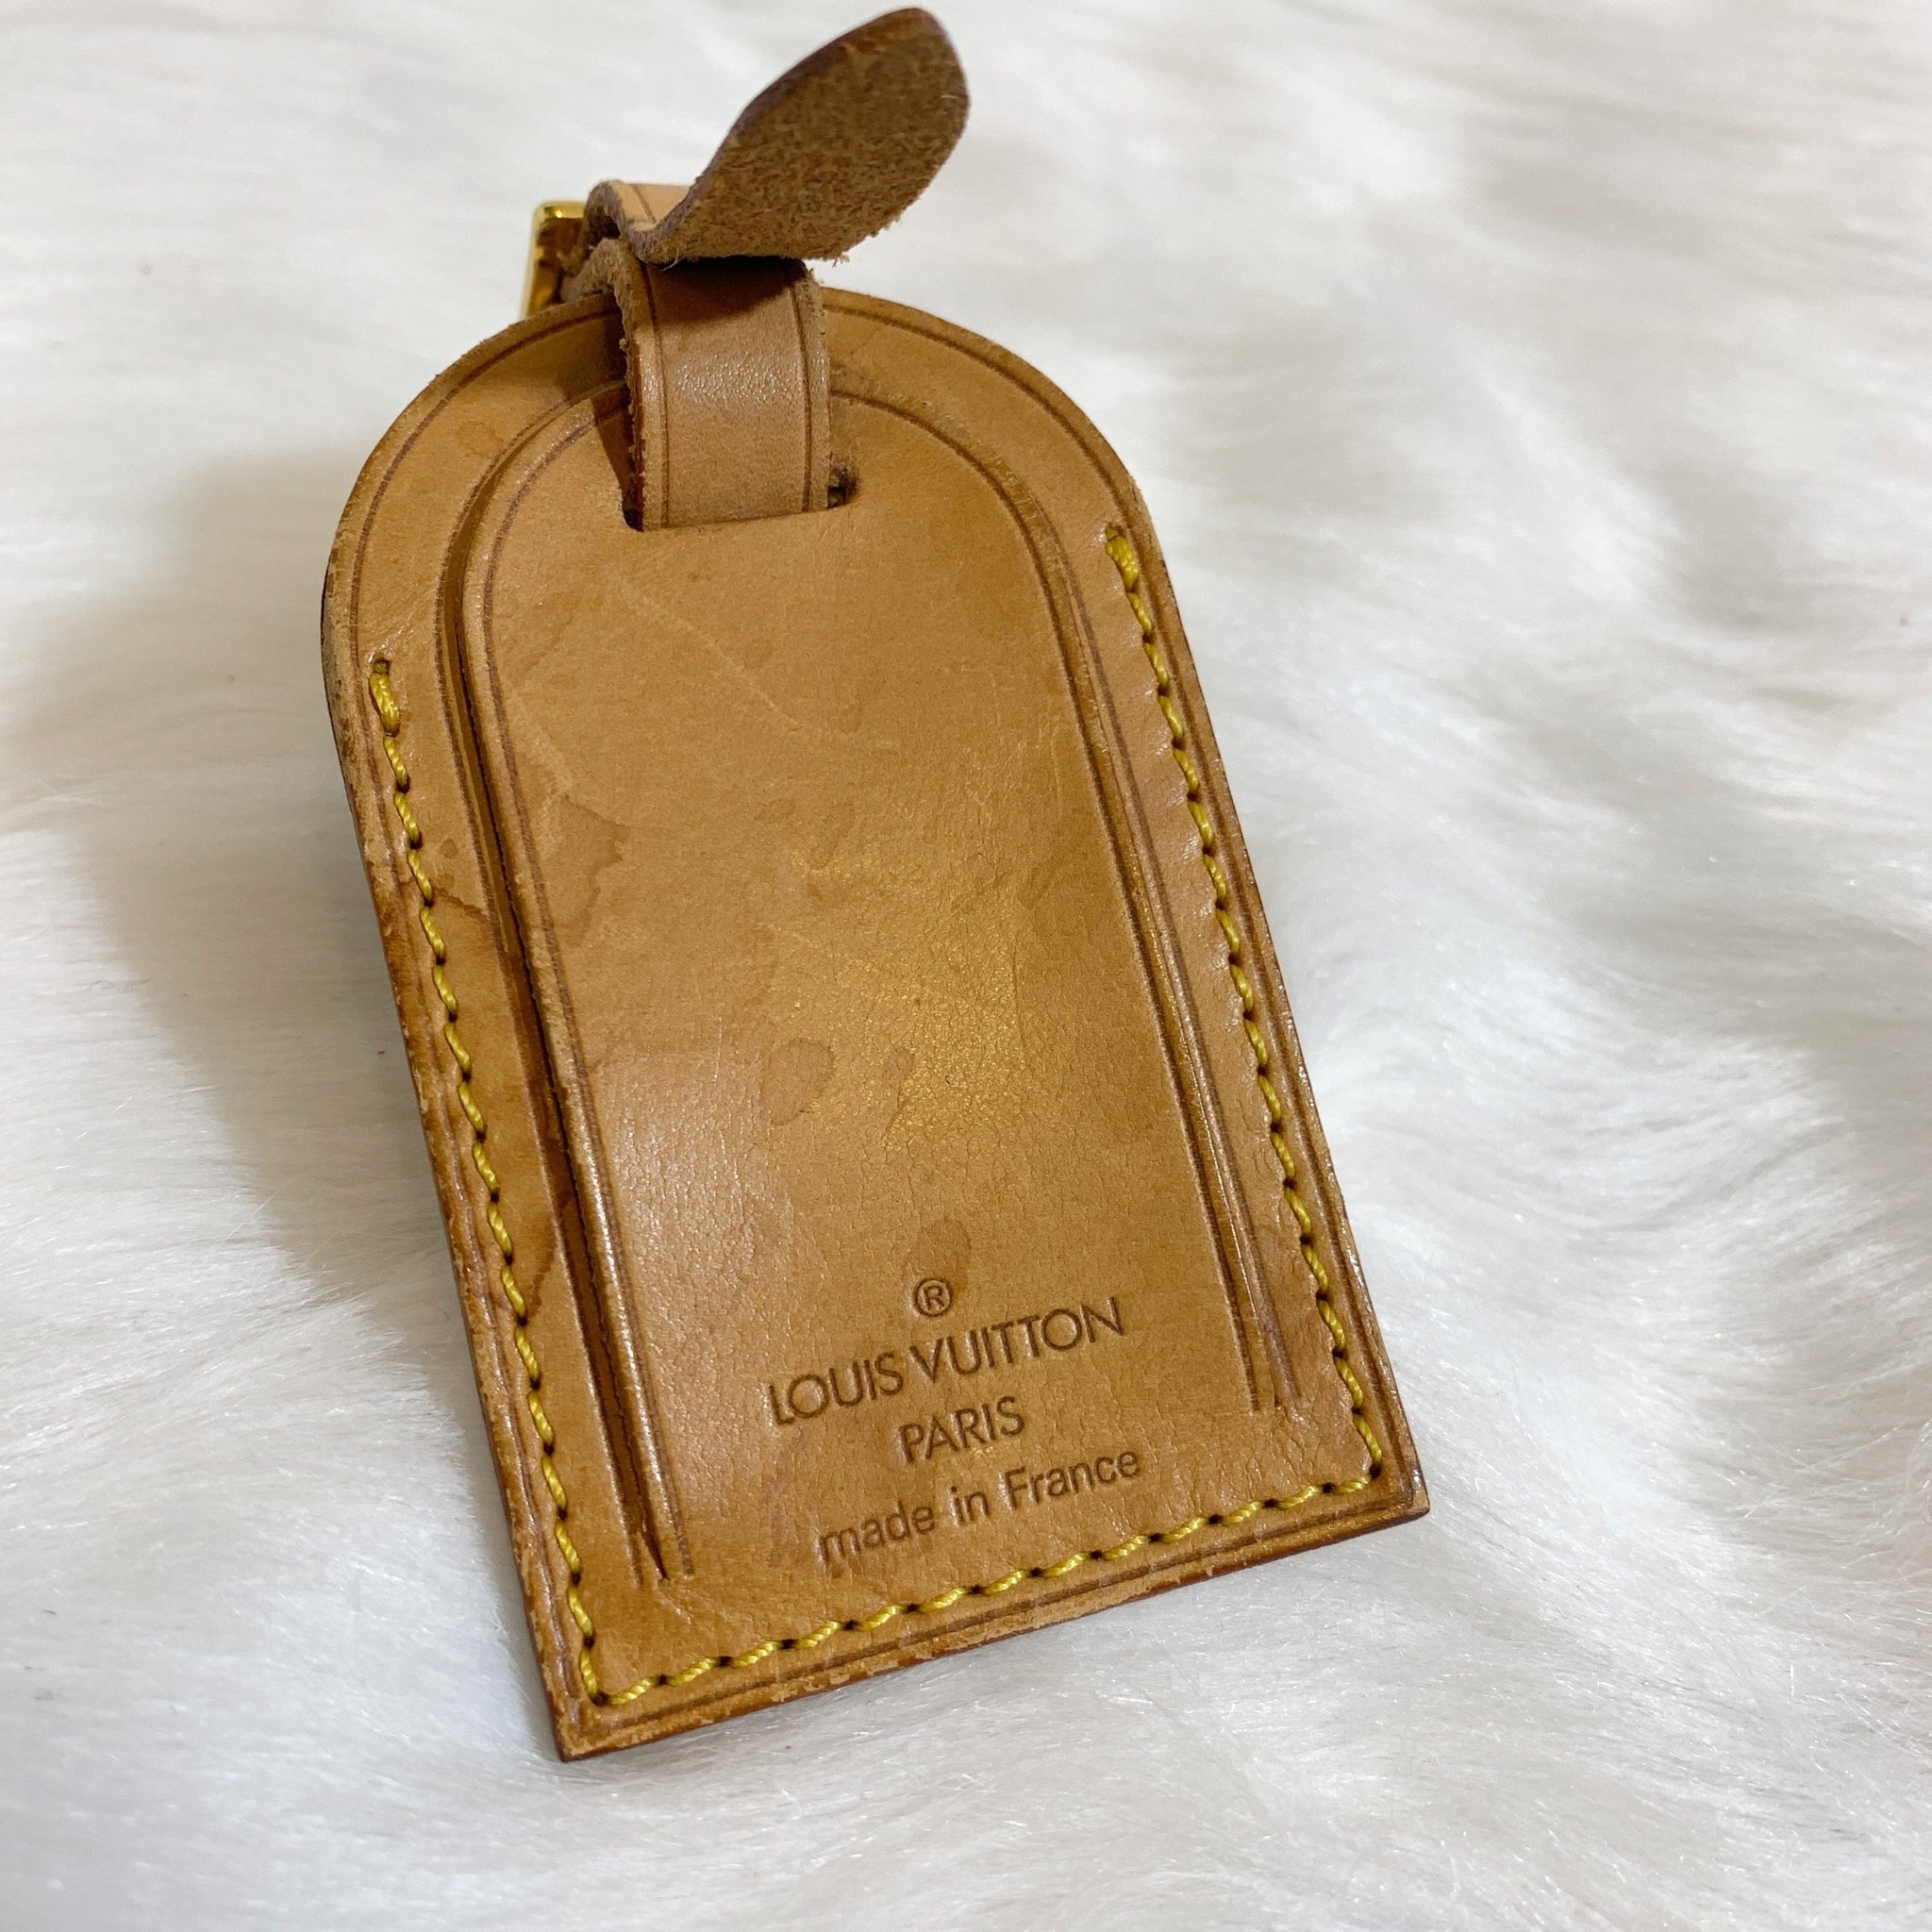 Authentic Louis Vuitton LV Name Tag and Poignet set Pre-owned.